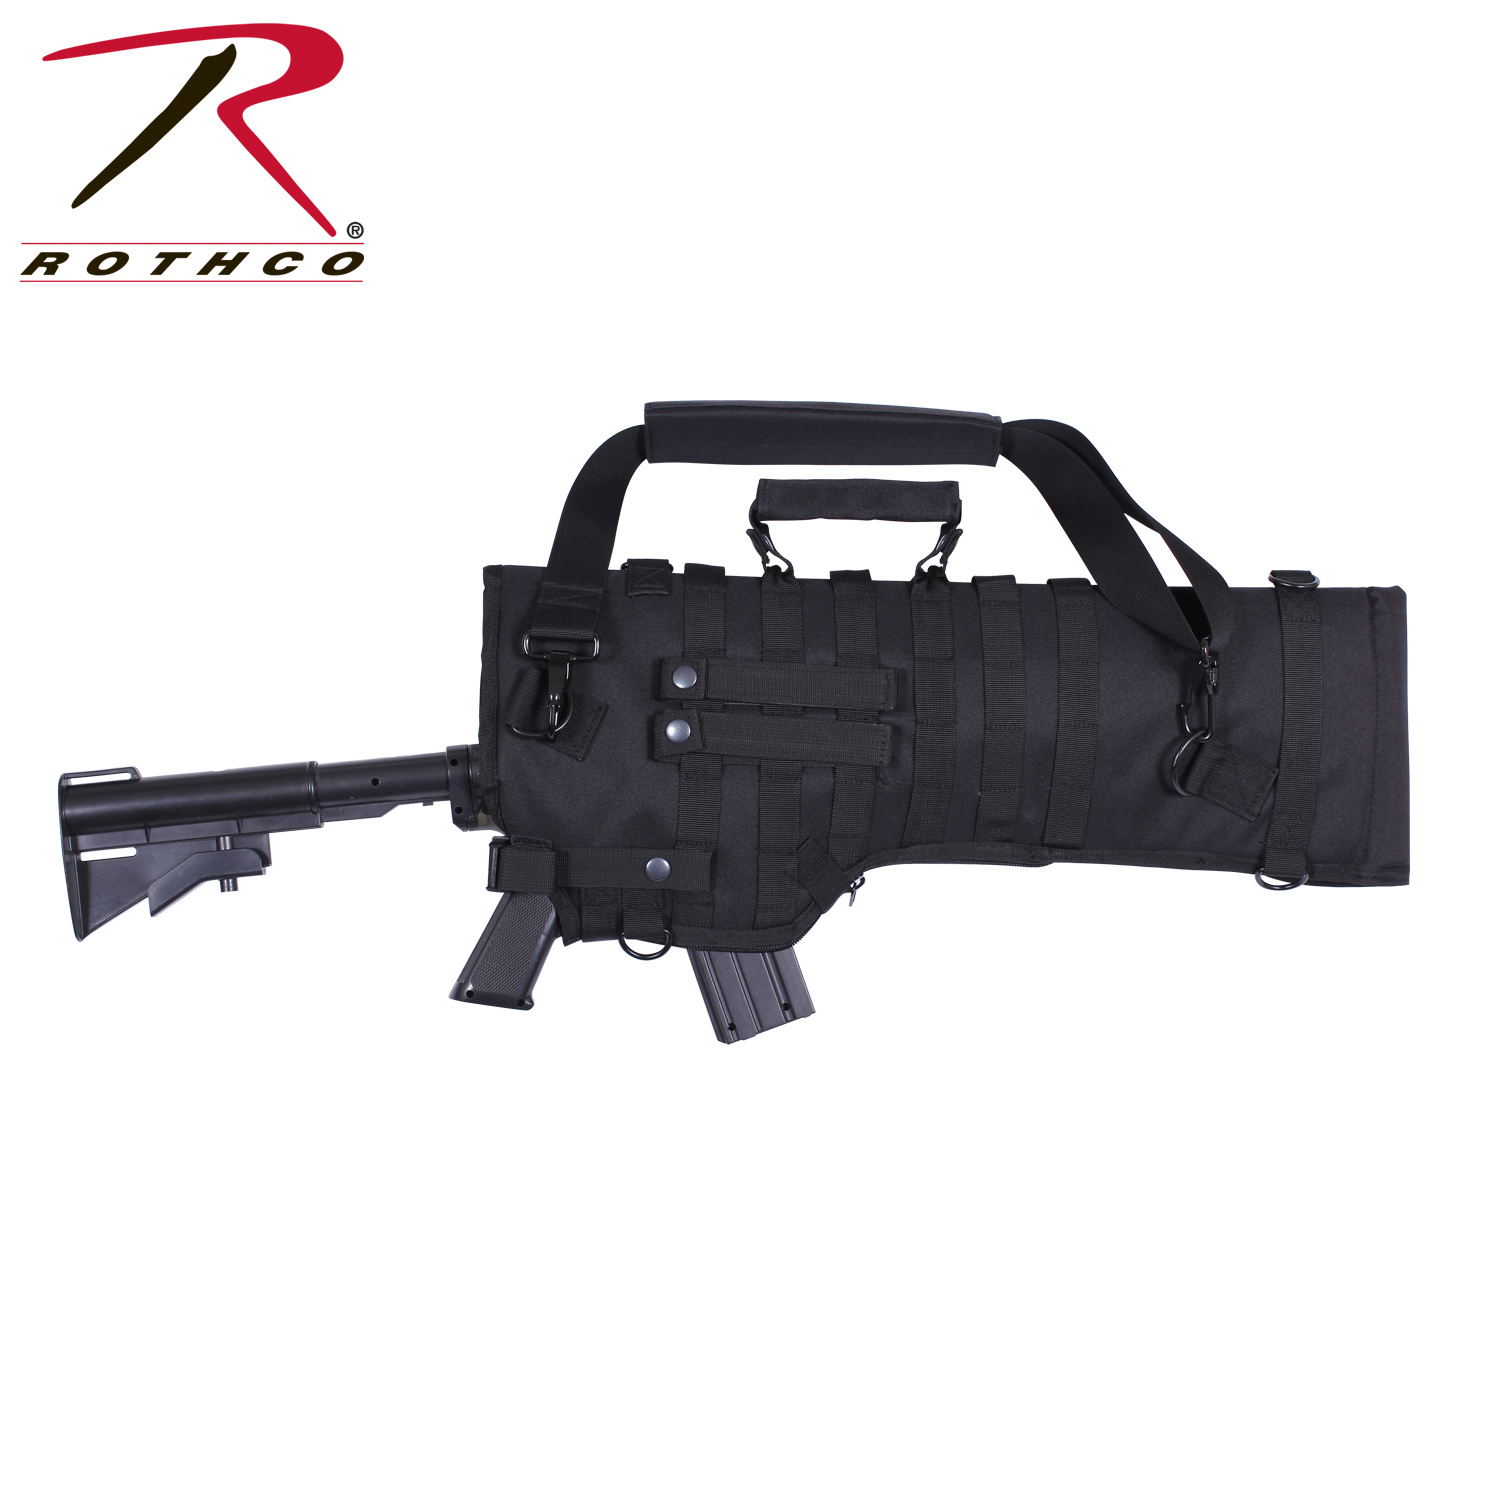 Rothco Tactical Rifle Scabbard